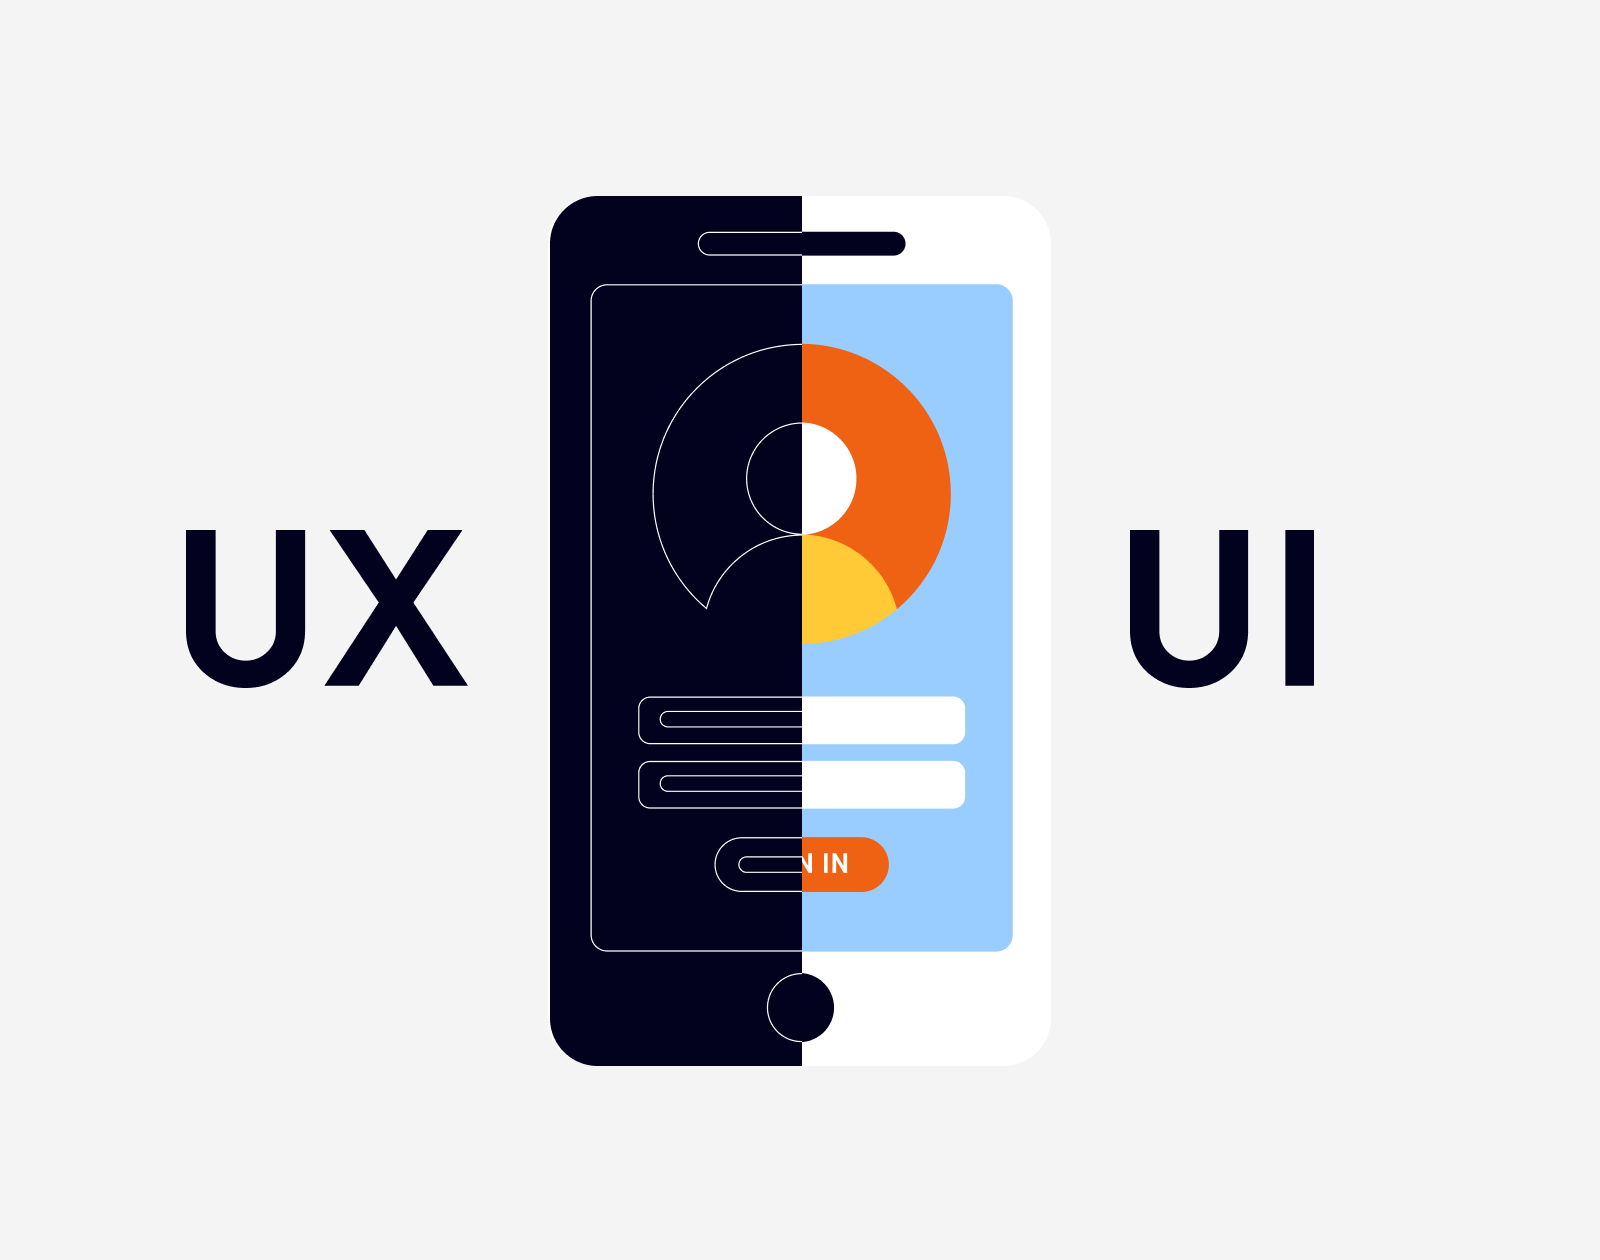 UI and UX design involve very different skill sets